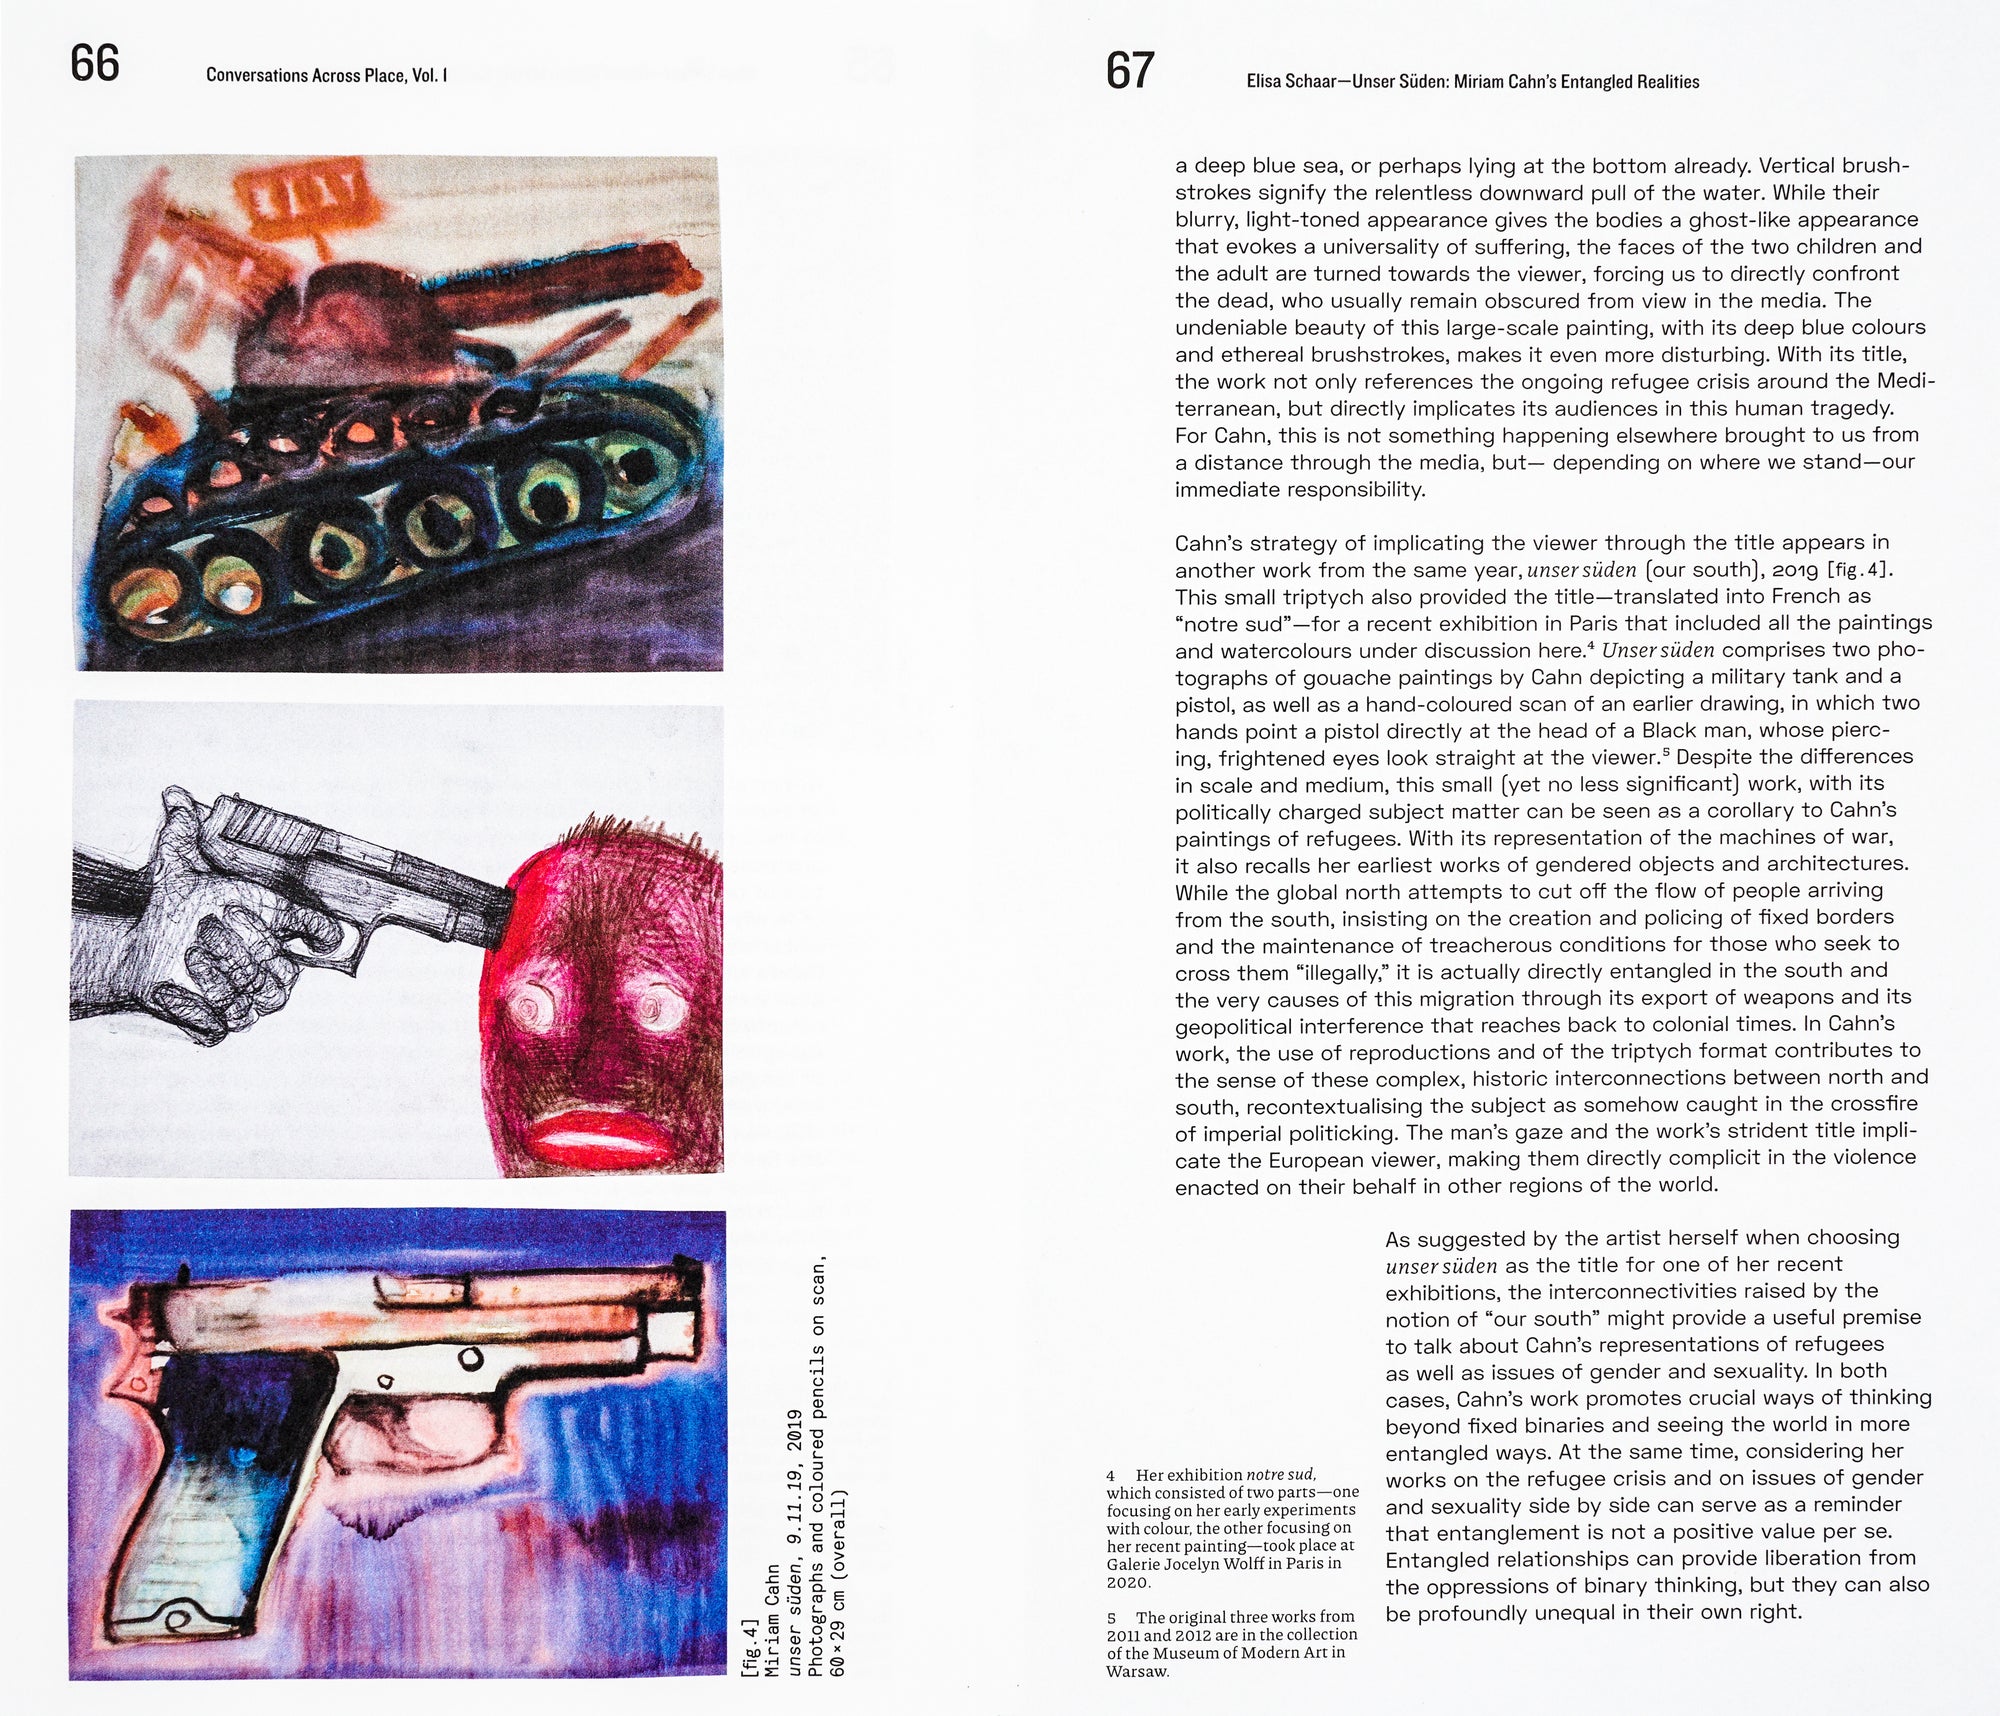 Book spread with white background, the left page holds three colour drawing images, one of an abstract tank, one of a gun being held to a red figurative head, and one depicting a hand gun. The right page contains one column of sans serif text in black spanning all over the page.